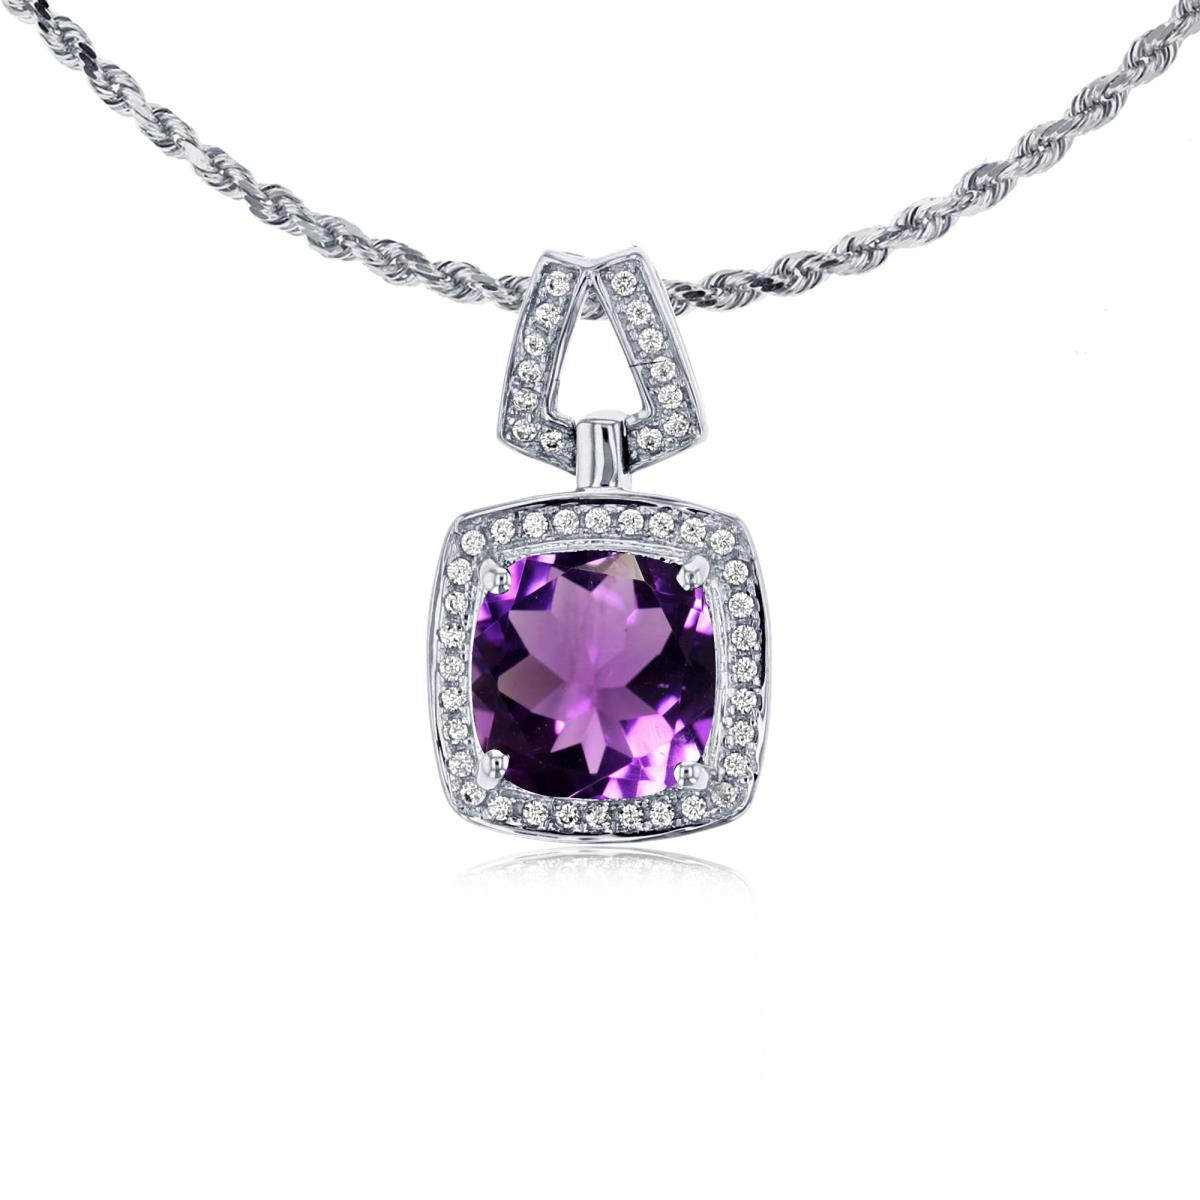 14K White Gold 7mm Cushion Amethyst & 0.10 CTTW Diamond Halo 18" Rope Chain Necklace